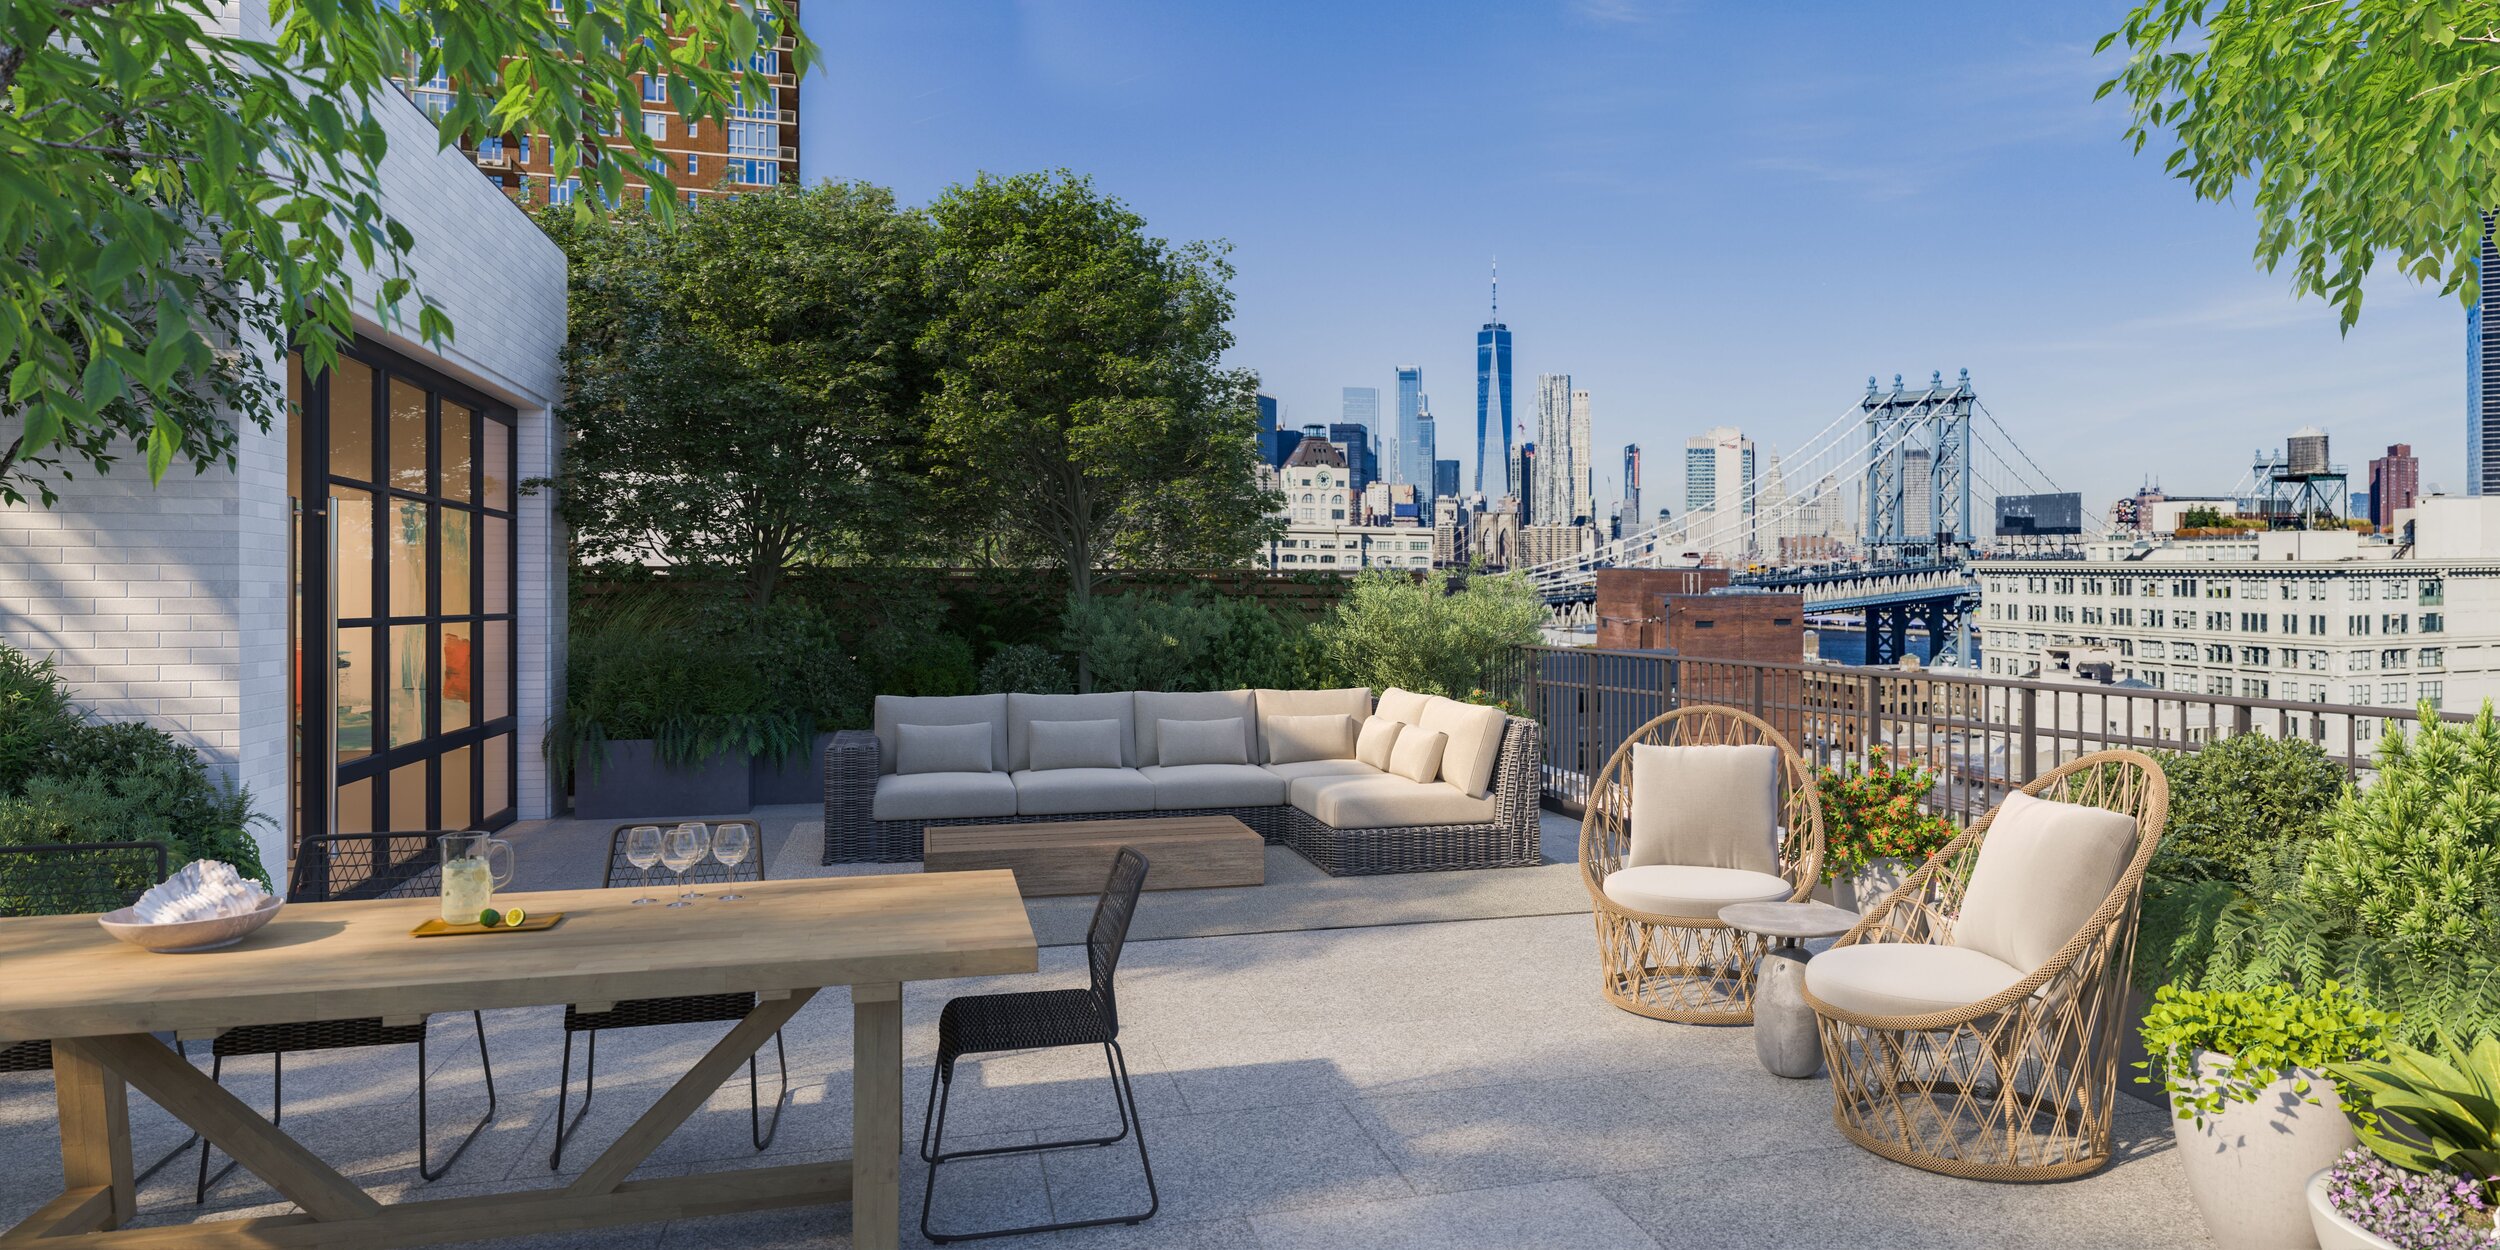  At Dumbo’s&nbsp; Front&nbsp;&amp;&nbsp;York ,&nbsp; residence 8X &nbsp;features an 845-square-foot rooftop terrace with a grill, which lends itself to extraordinary outdoor entertaining. The space can accommodate a large dining table and a row of da